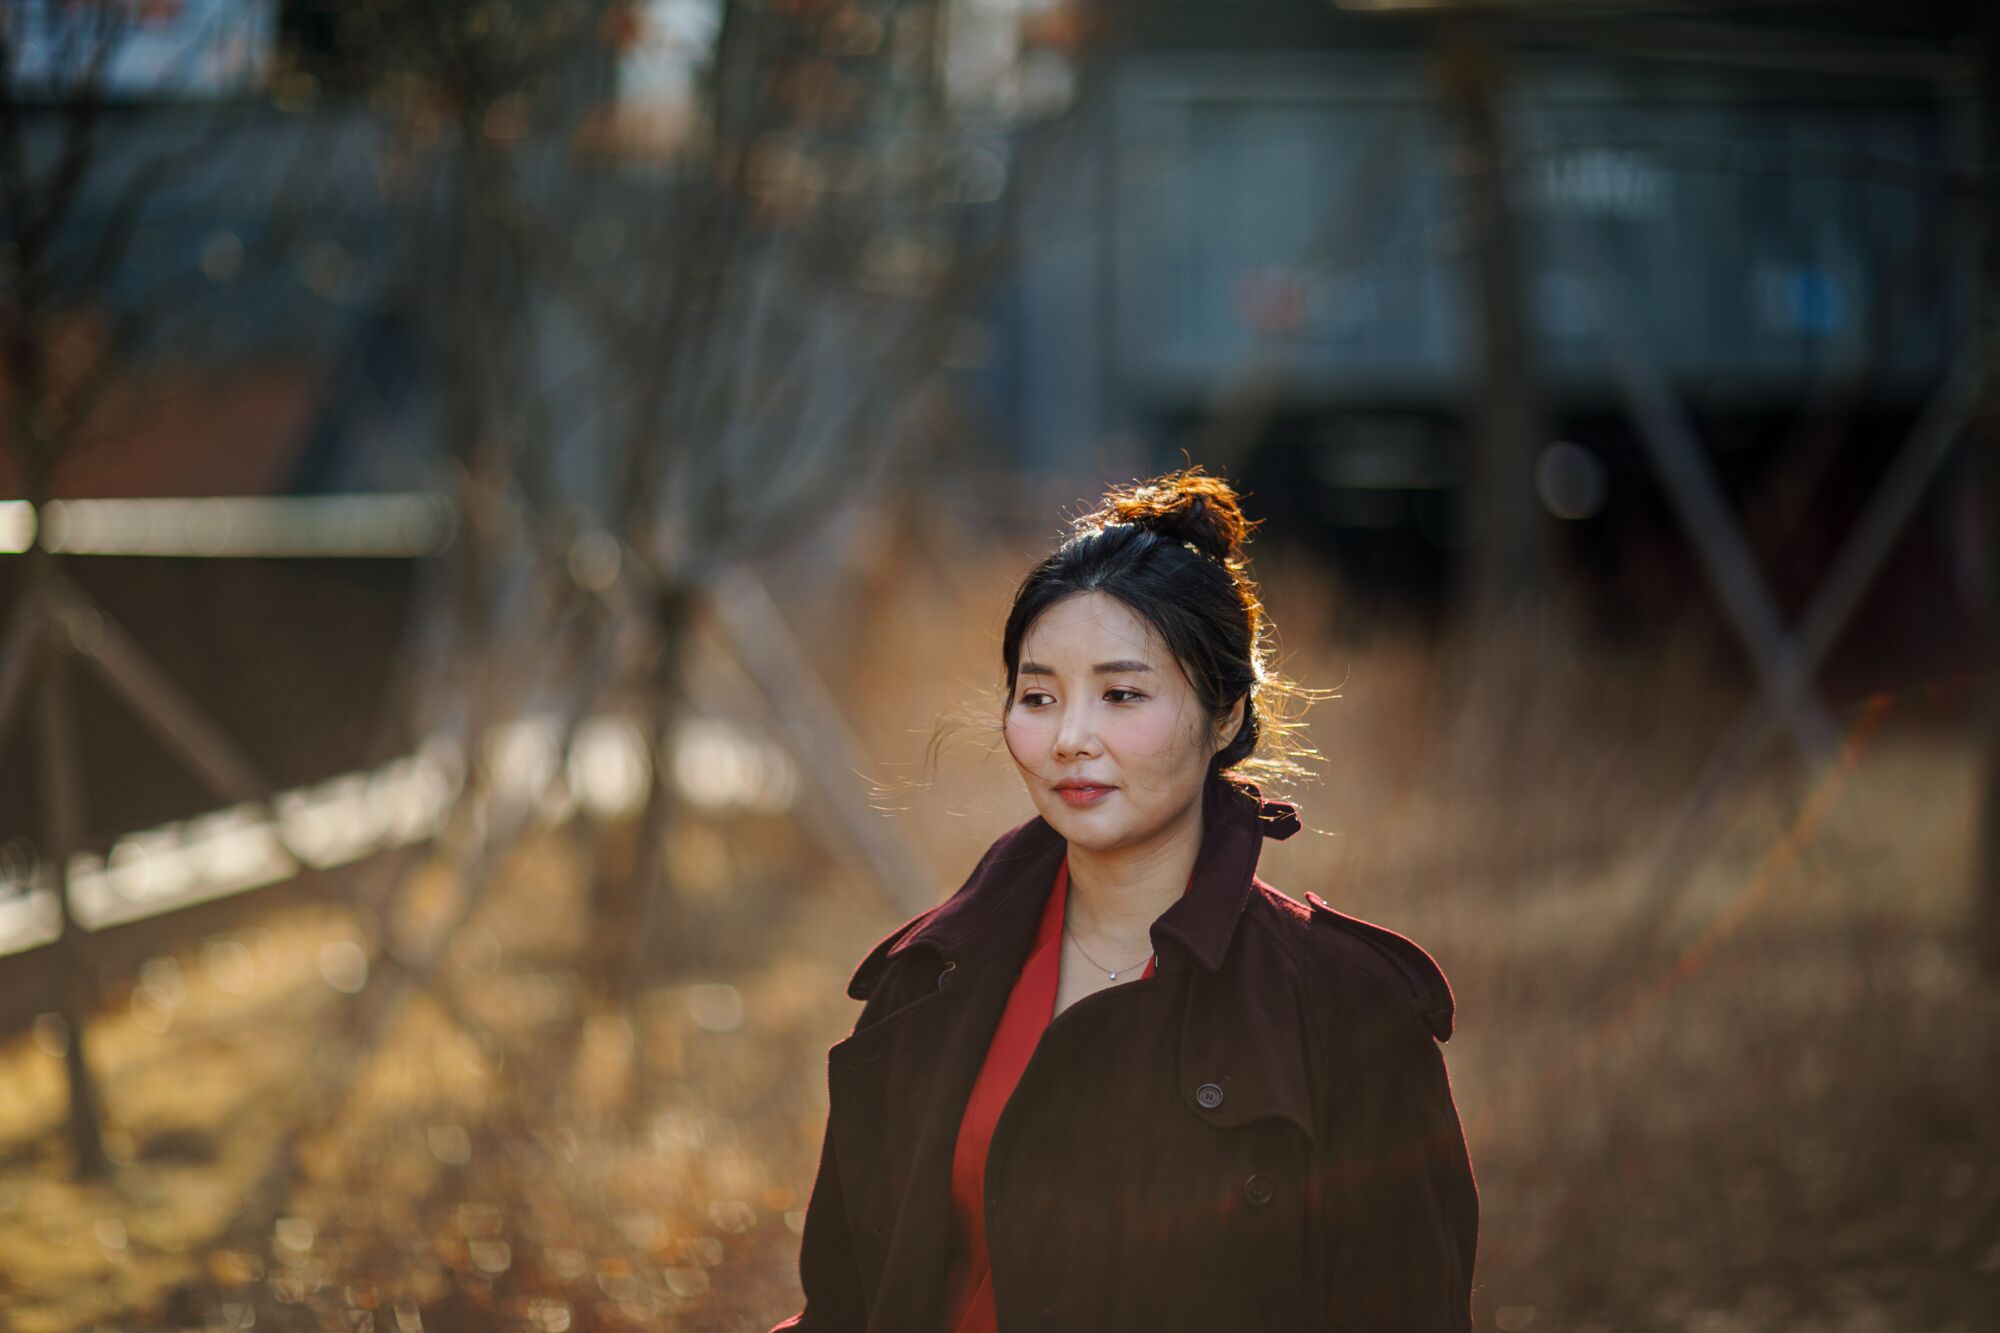 Yoon Seol Mi is a North Korean refugee who escaped into China, only to be sold into a forced marriage in a rural village.